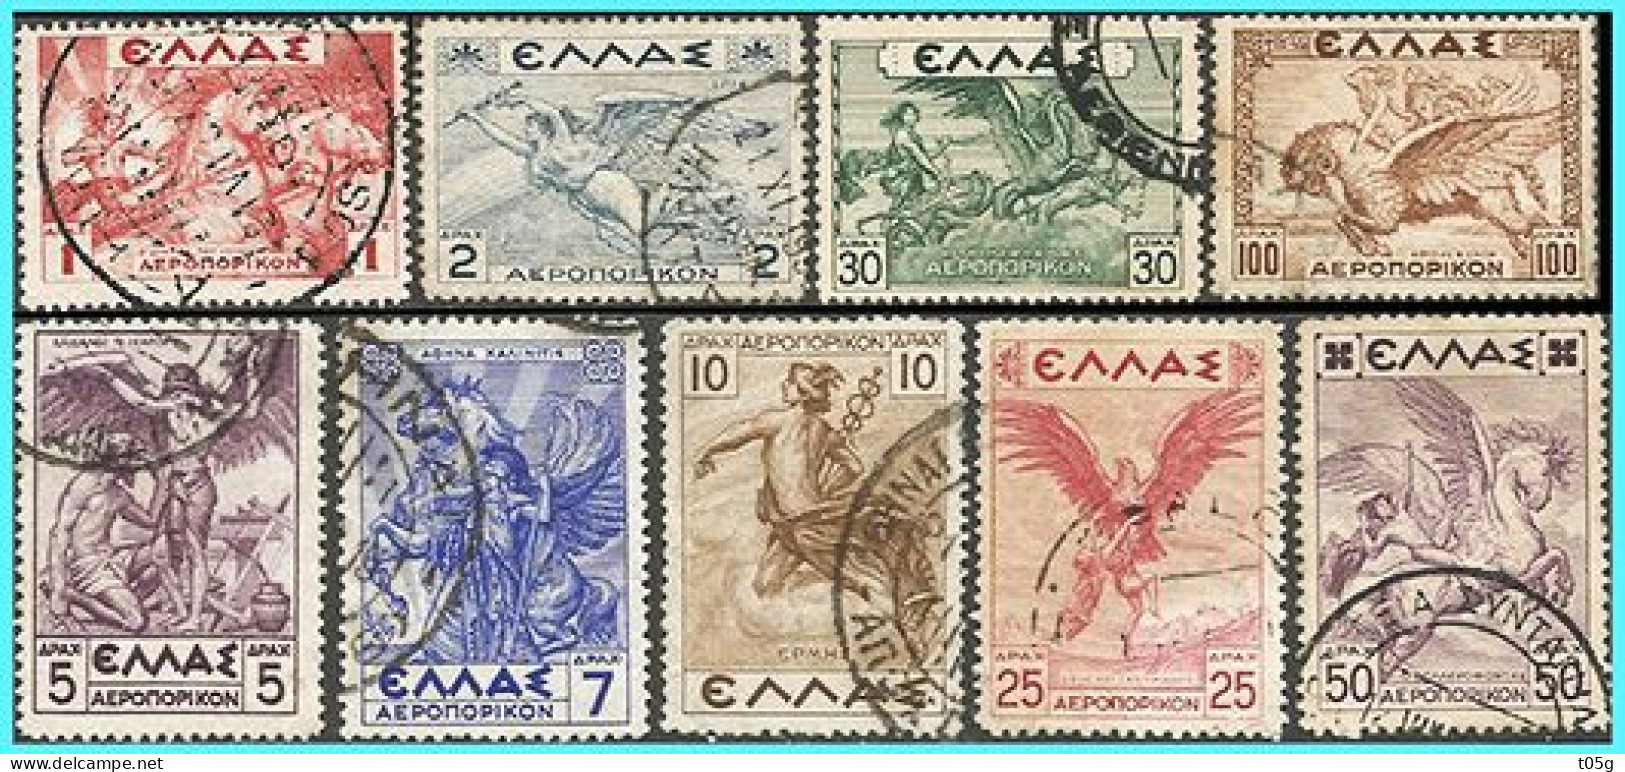 GREECE- GRECE - HELLAS 1935: "Mythological"  Airpost Stamps Compl. Set used - Neufs